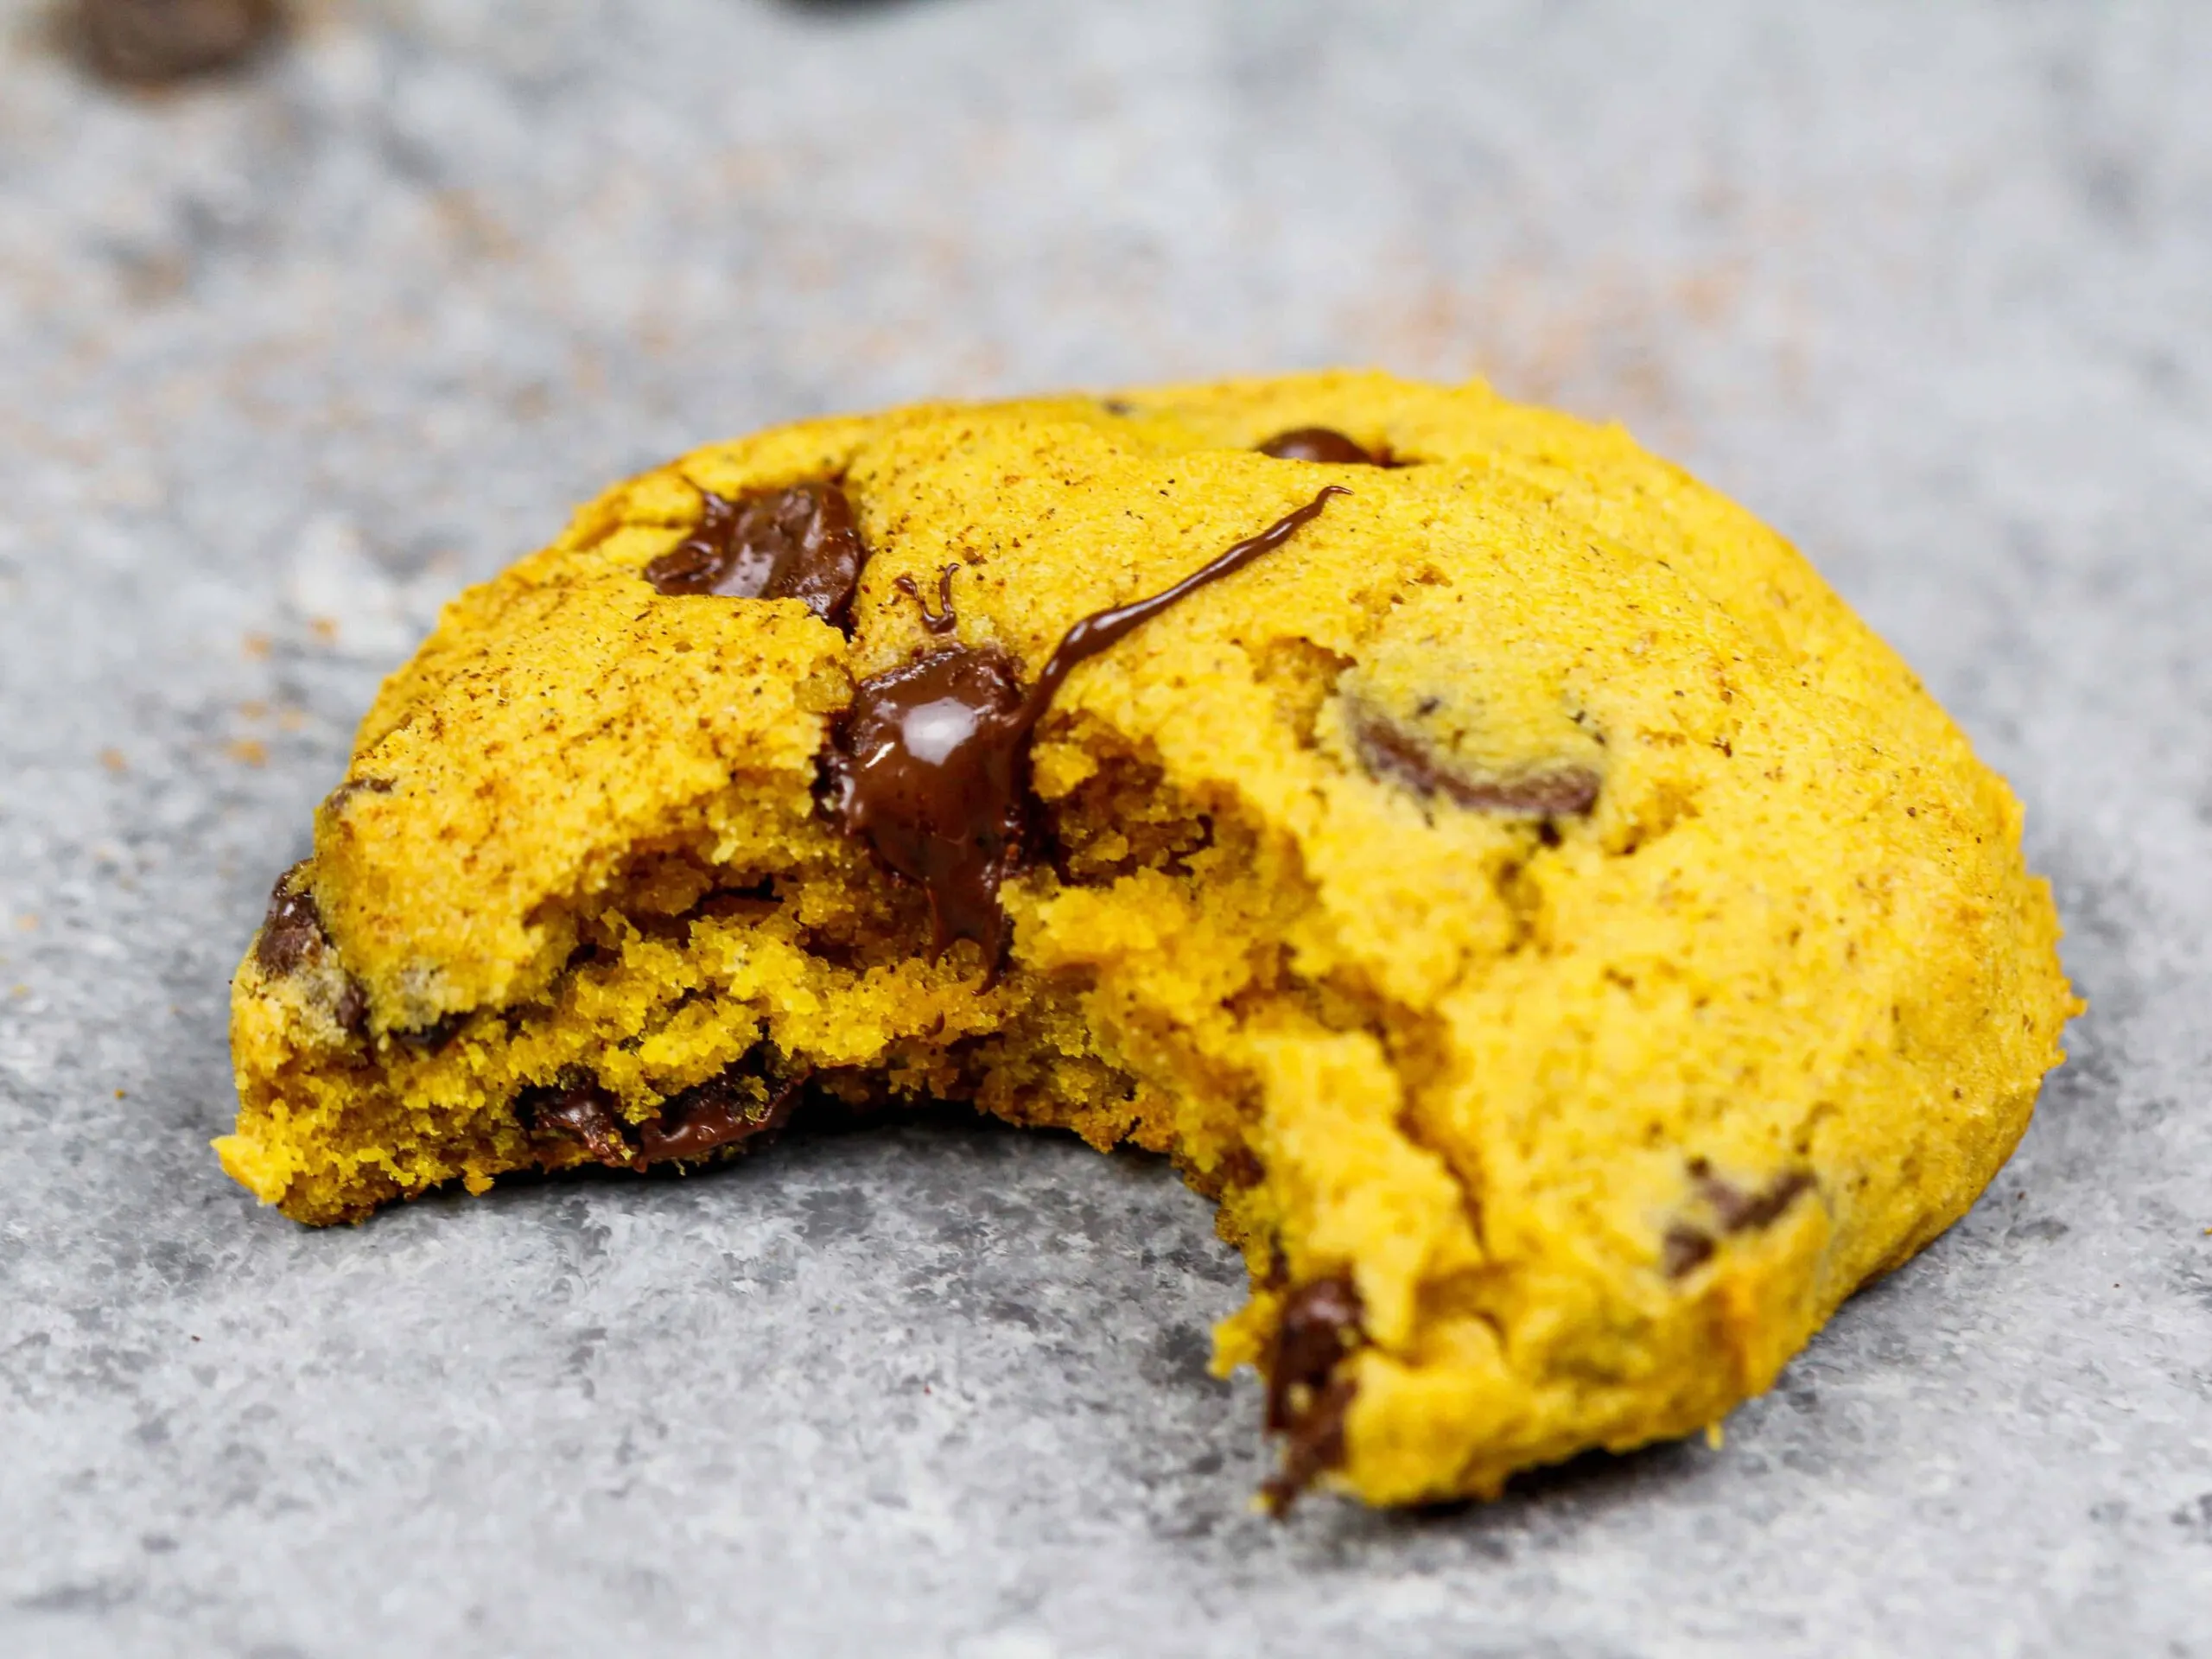 image of a bitten into vegan chocolate chip pumpkin cookie to show it's light and fluffy texture